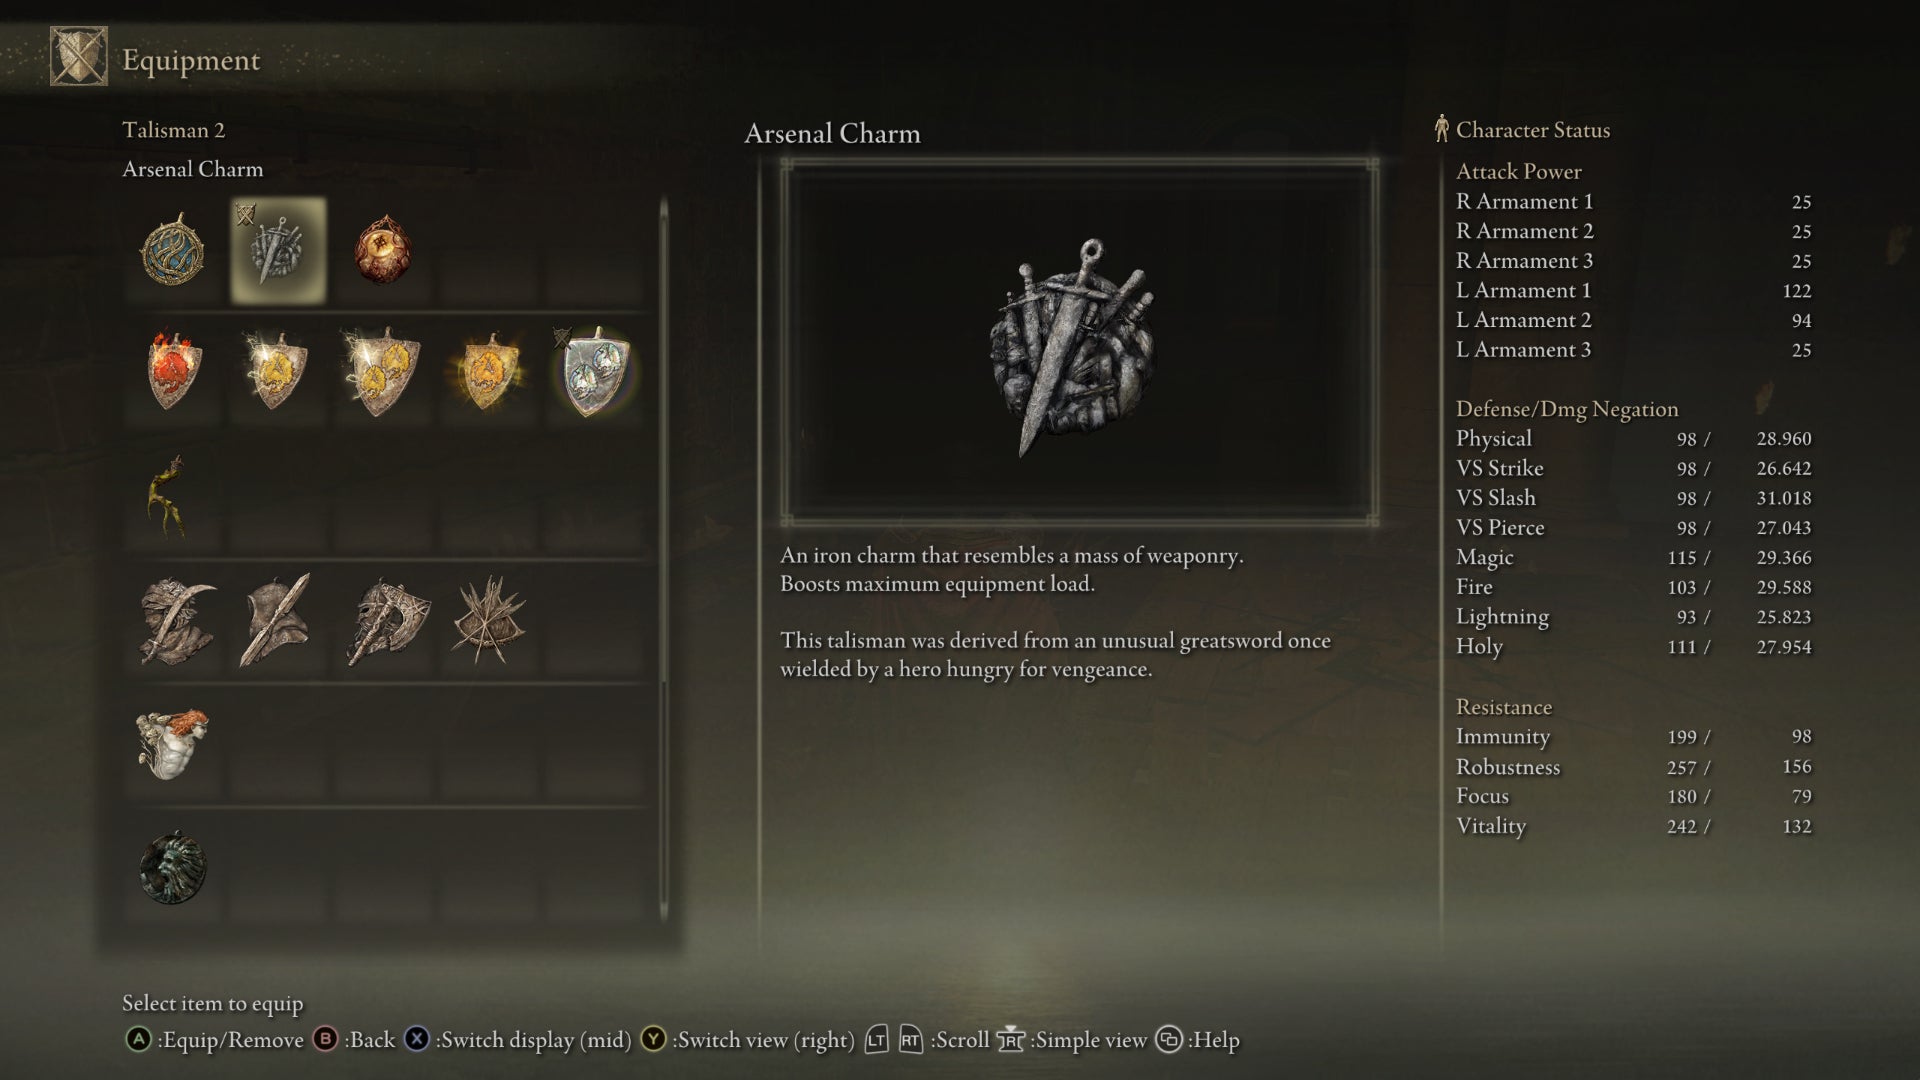 The Equipment screen in Elden Ring, with the Arsenal Charm Talisman highlighted.